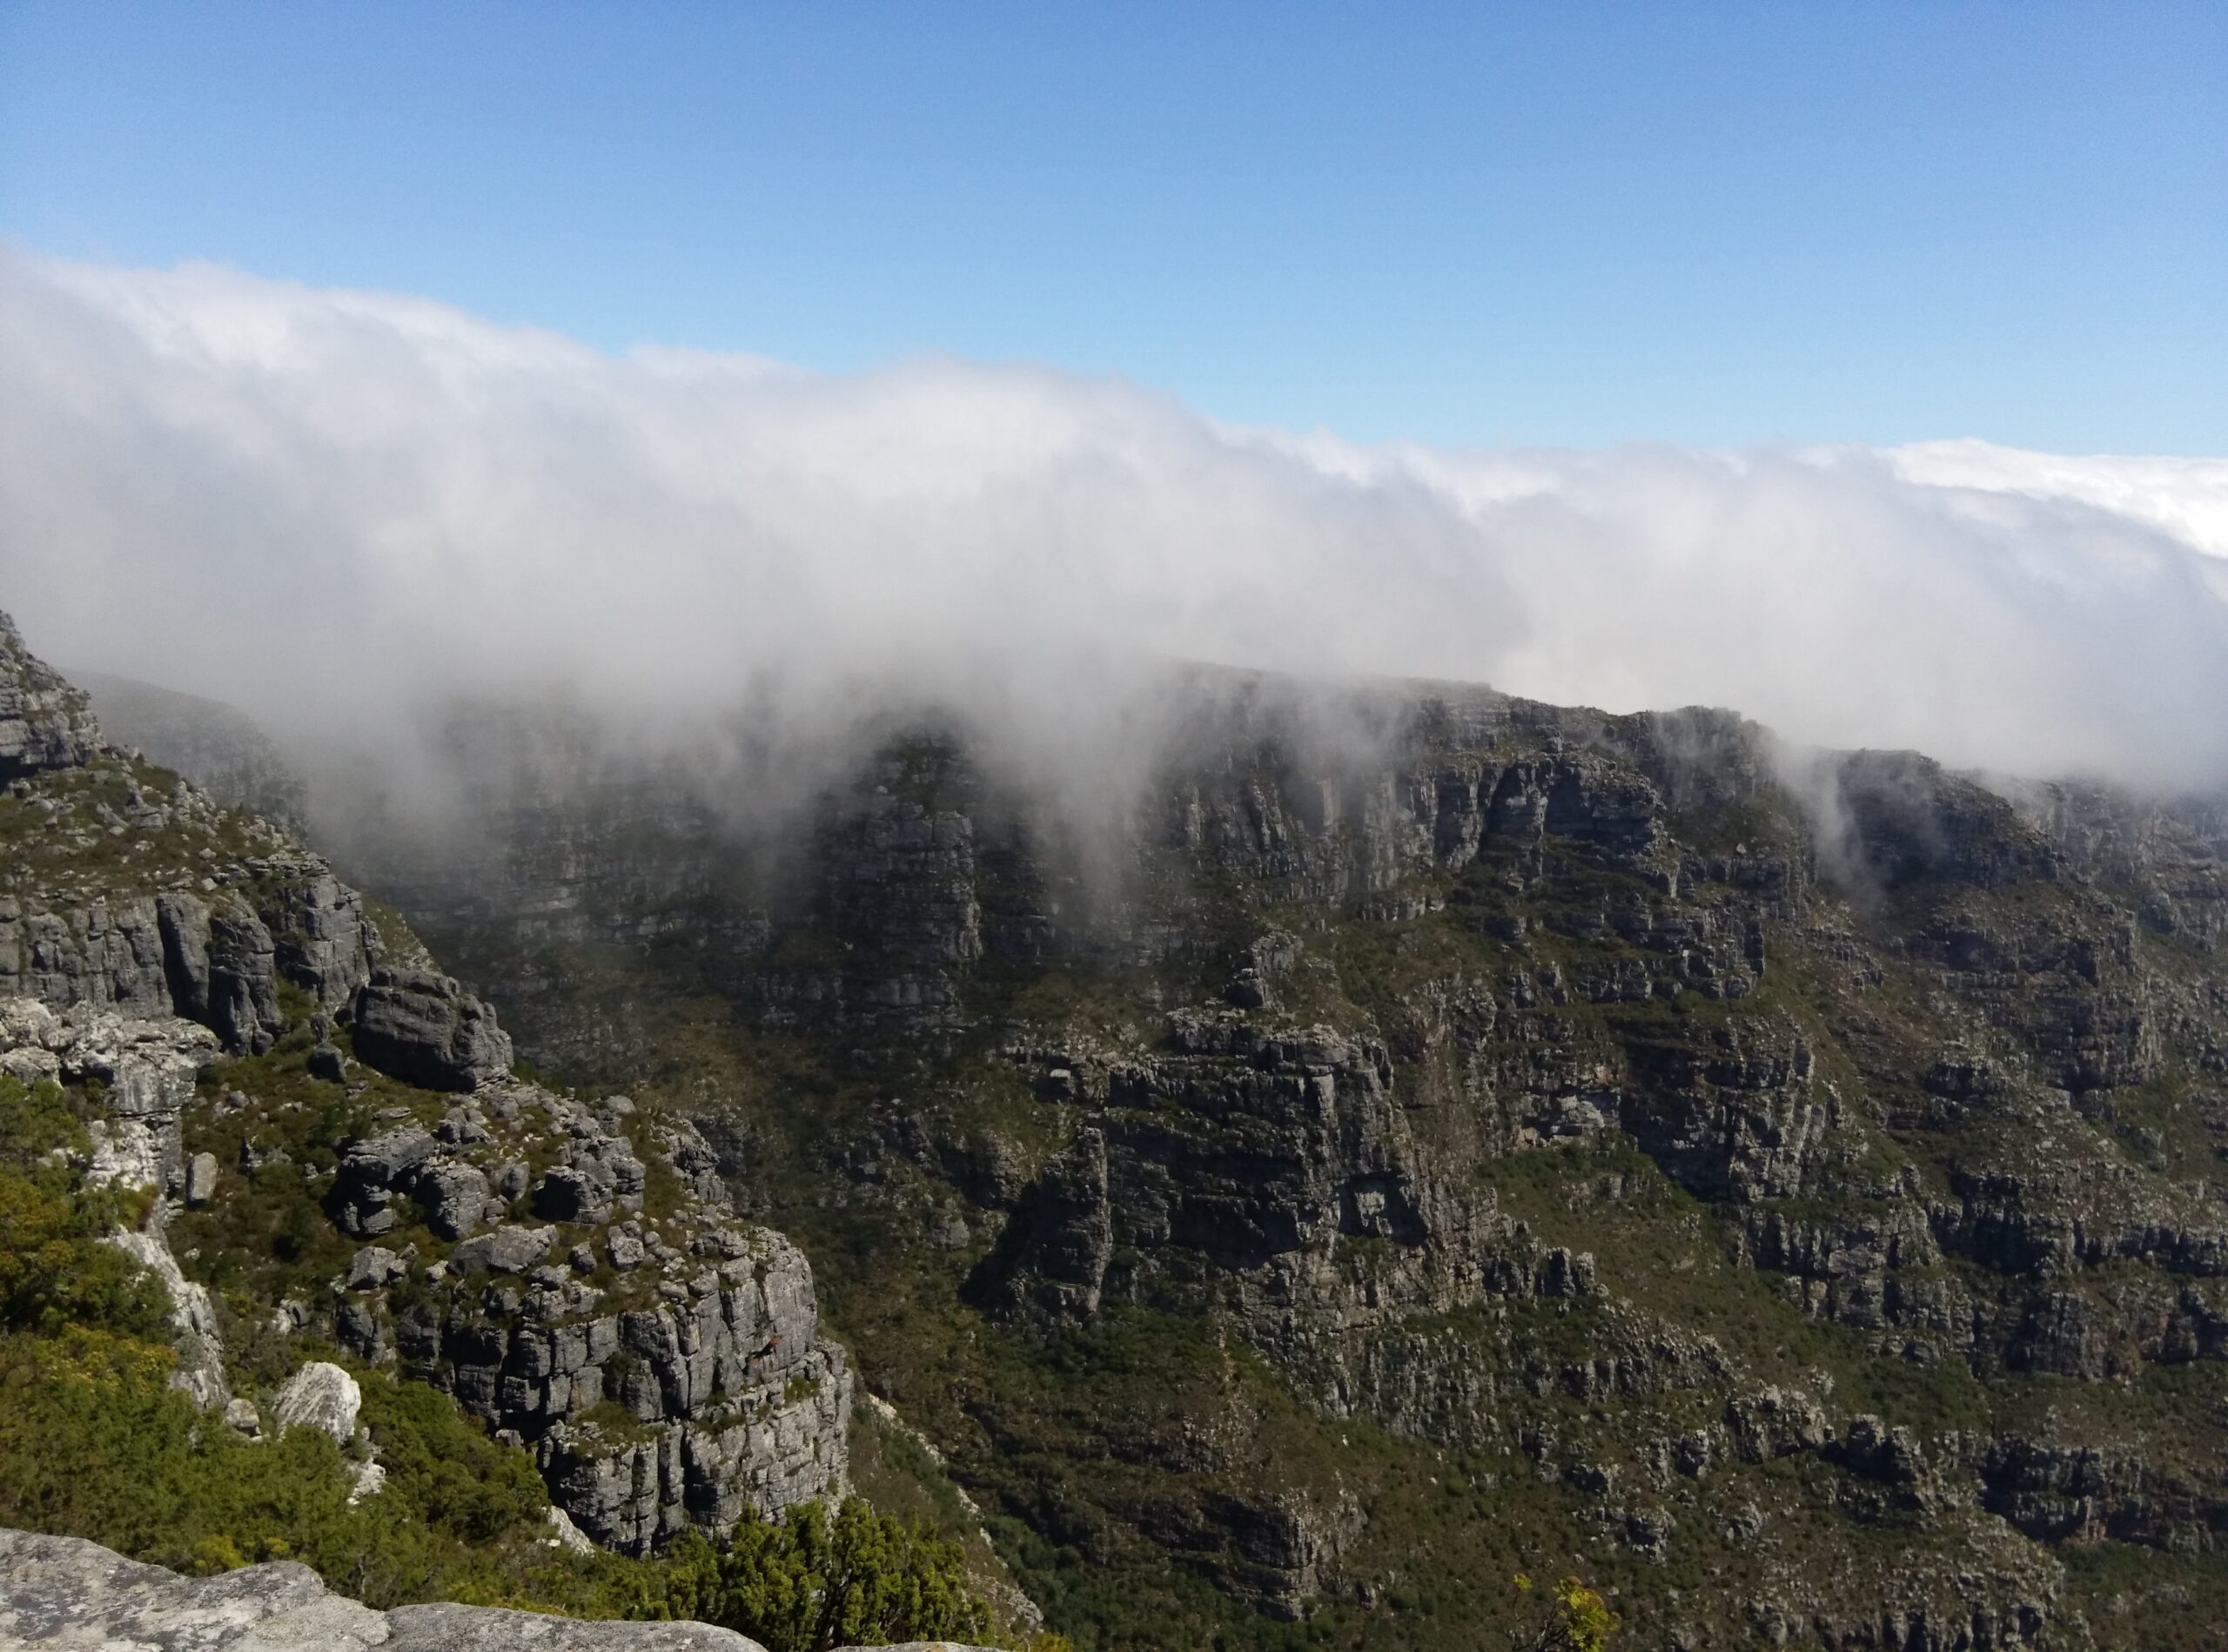 Day 3 – Robben Island and Table Mountain